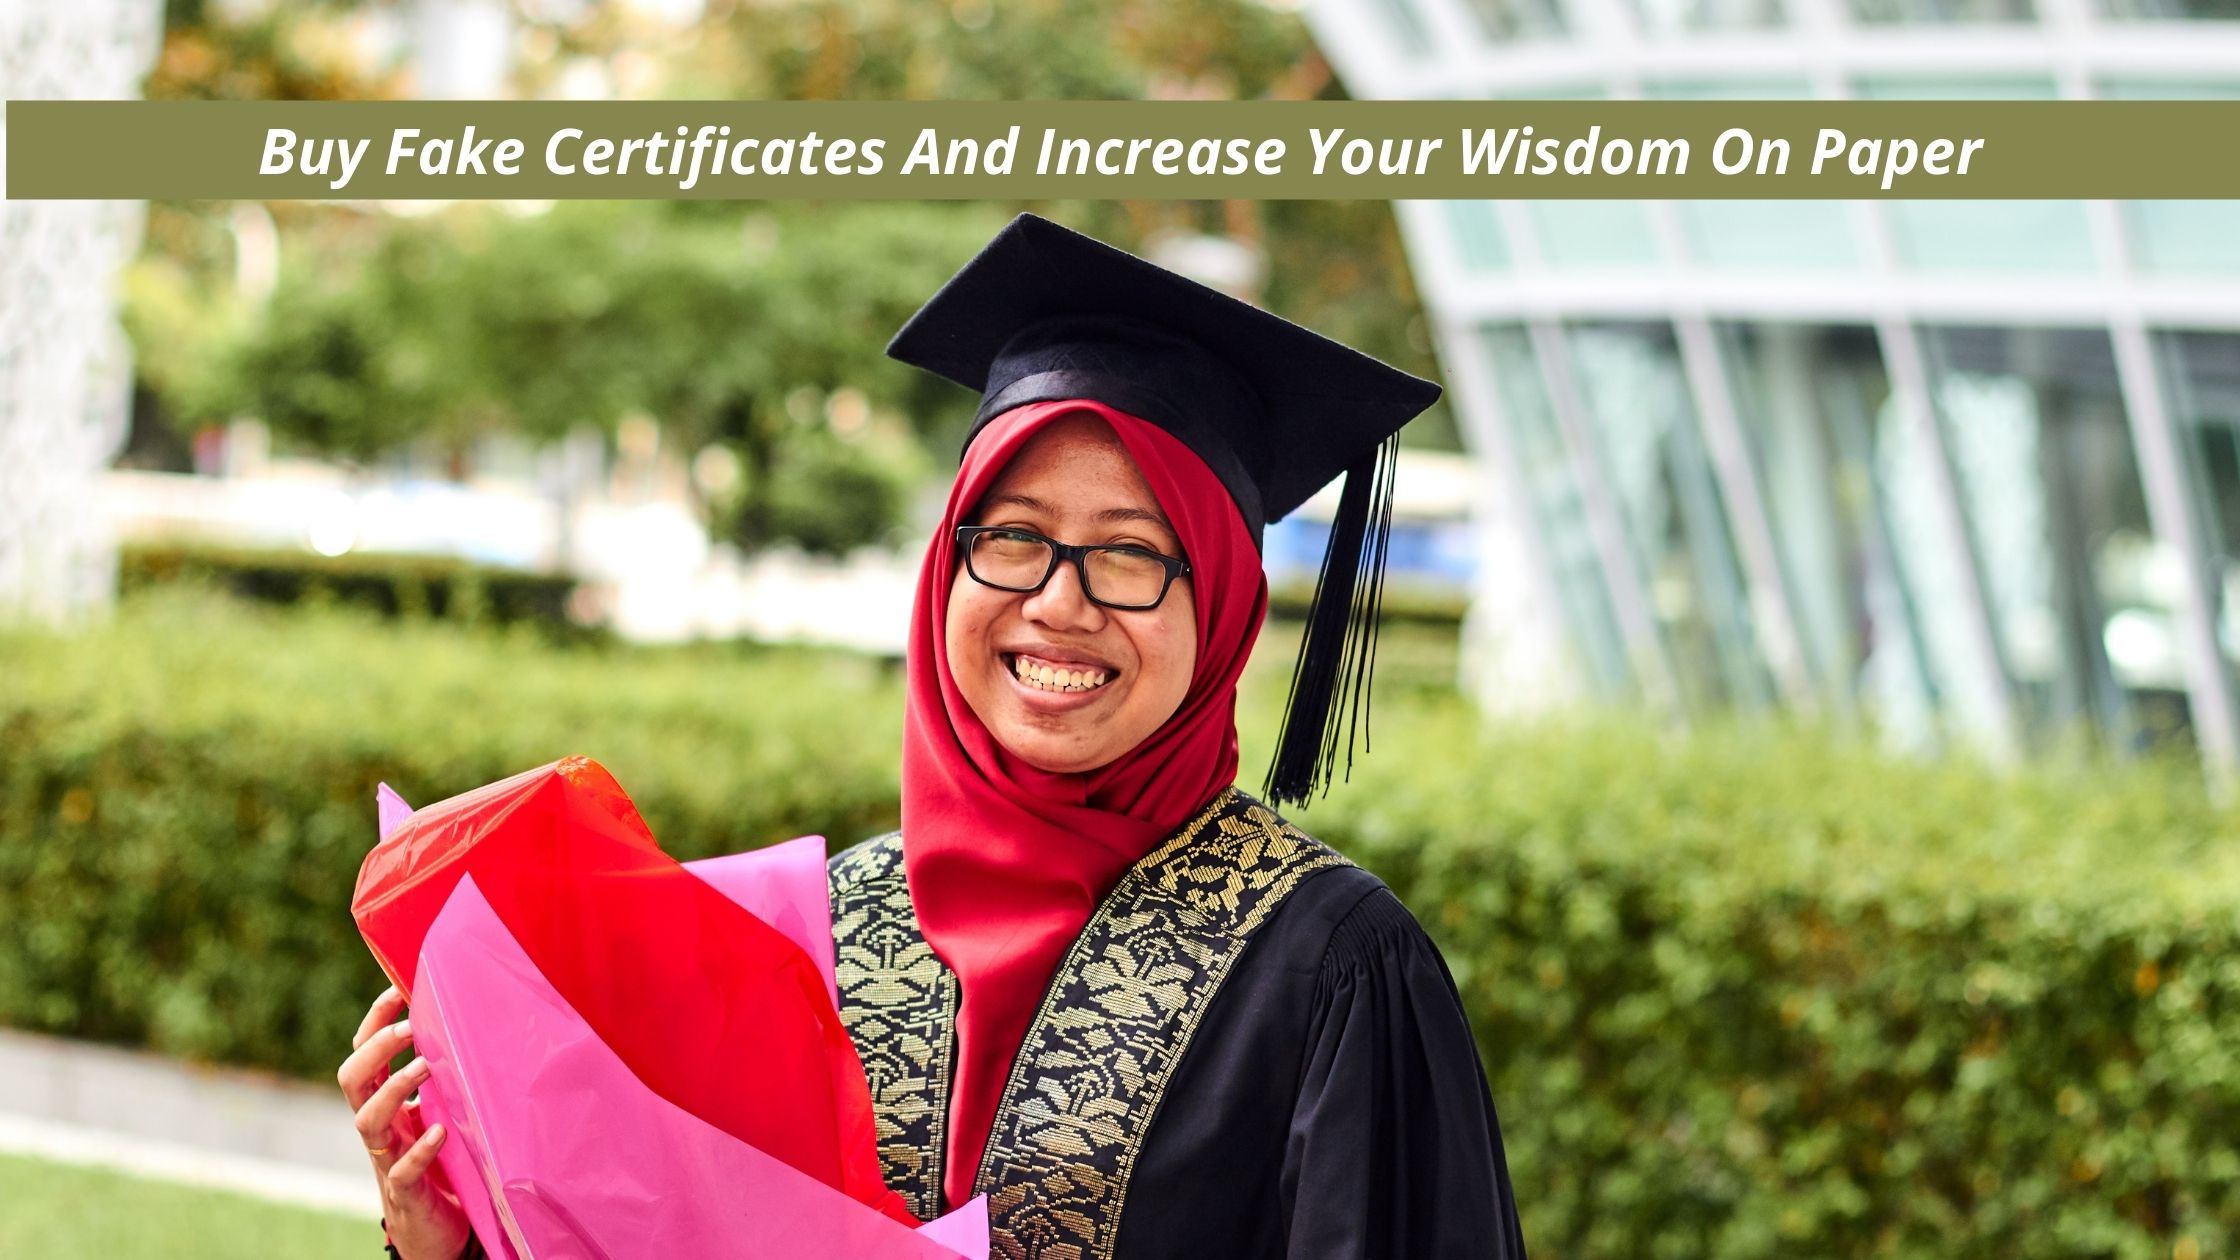 Buy Fake Certificates And Increase Your Wisdom On Paper